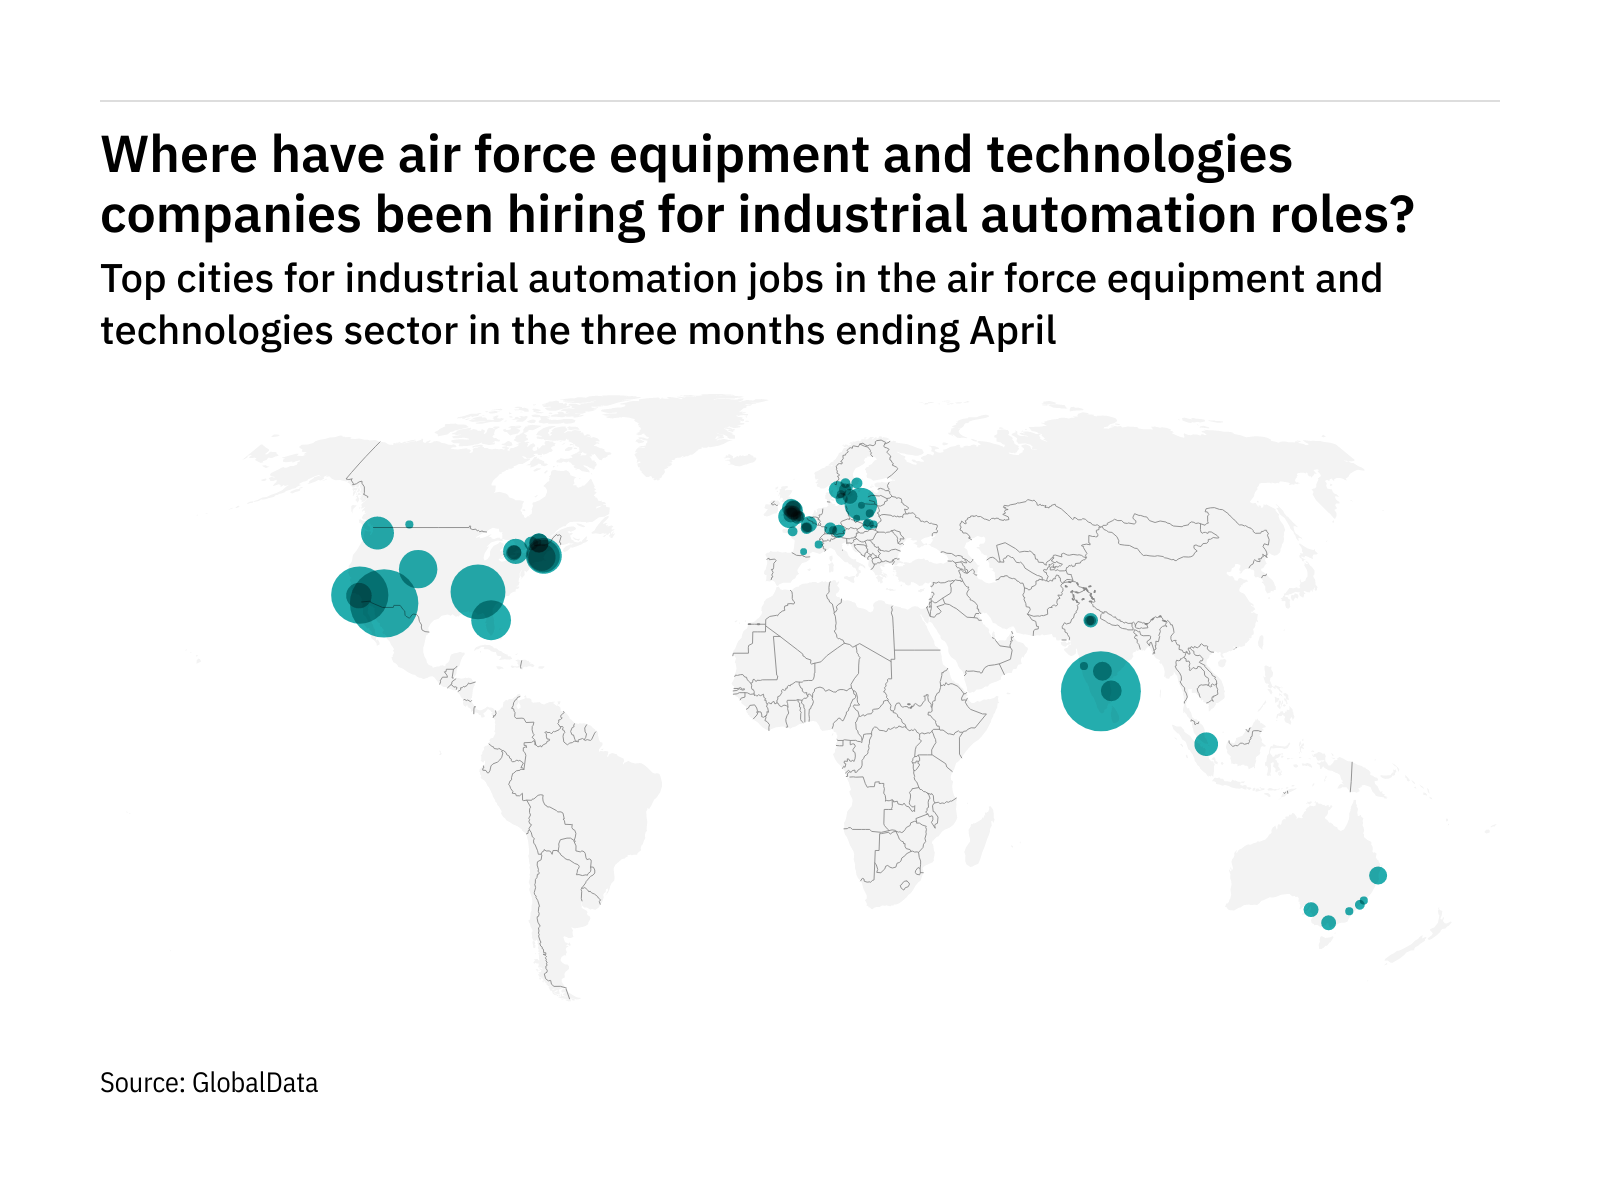 Asia-Pacific is seeing a hiring boom in air force industry industrial automation roles